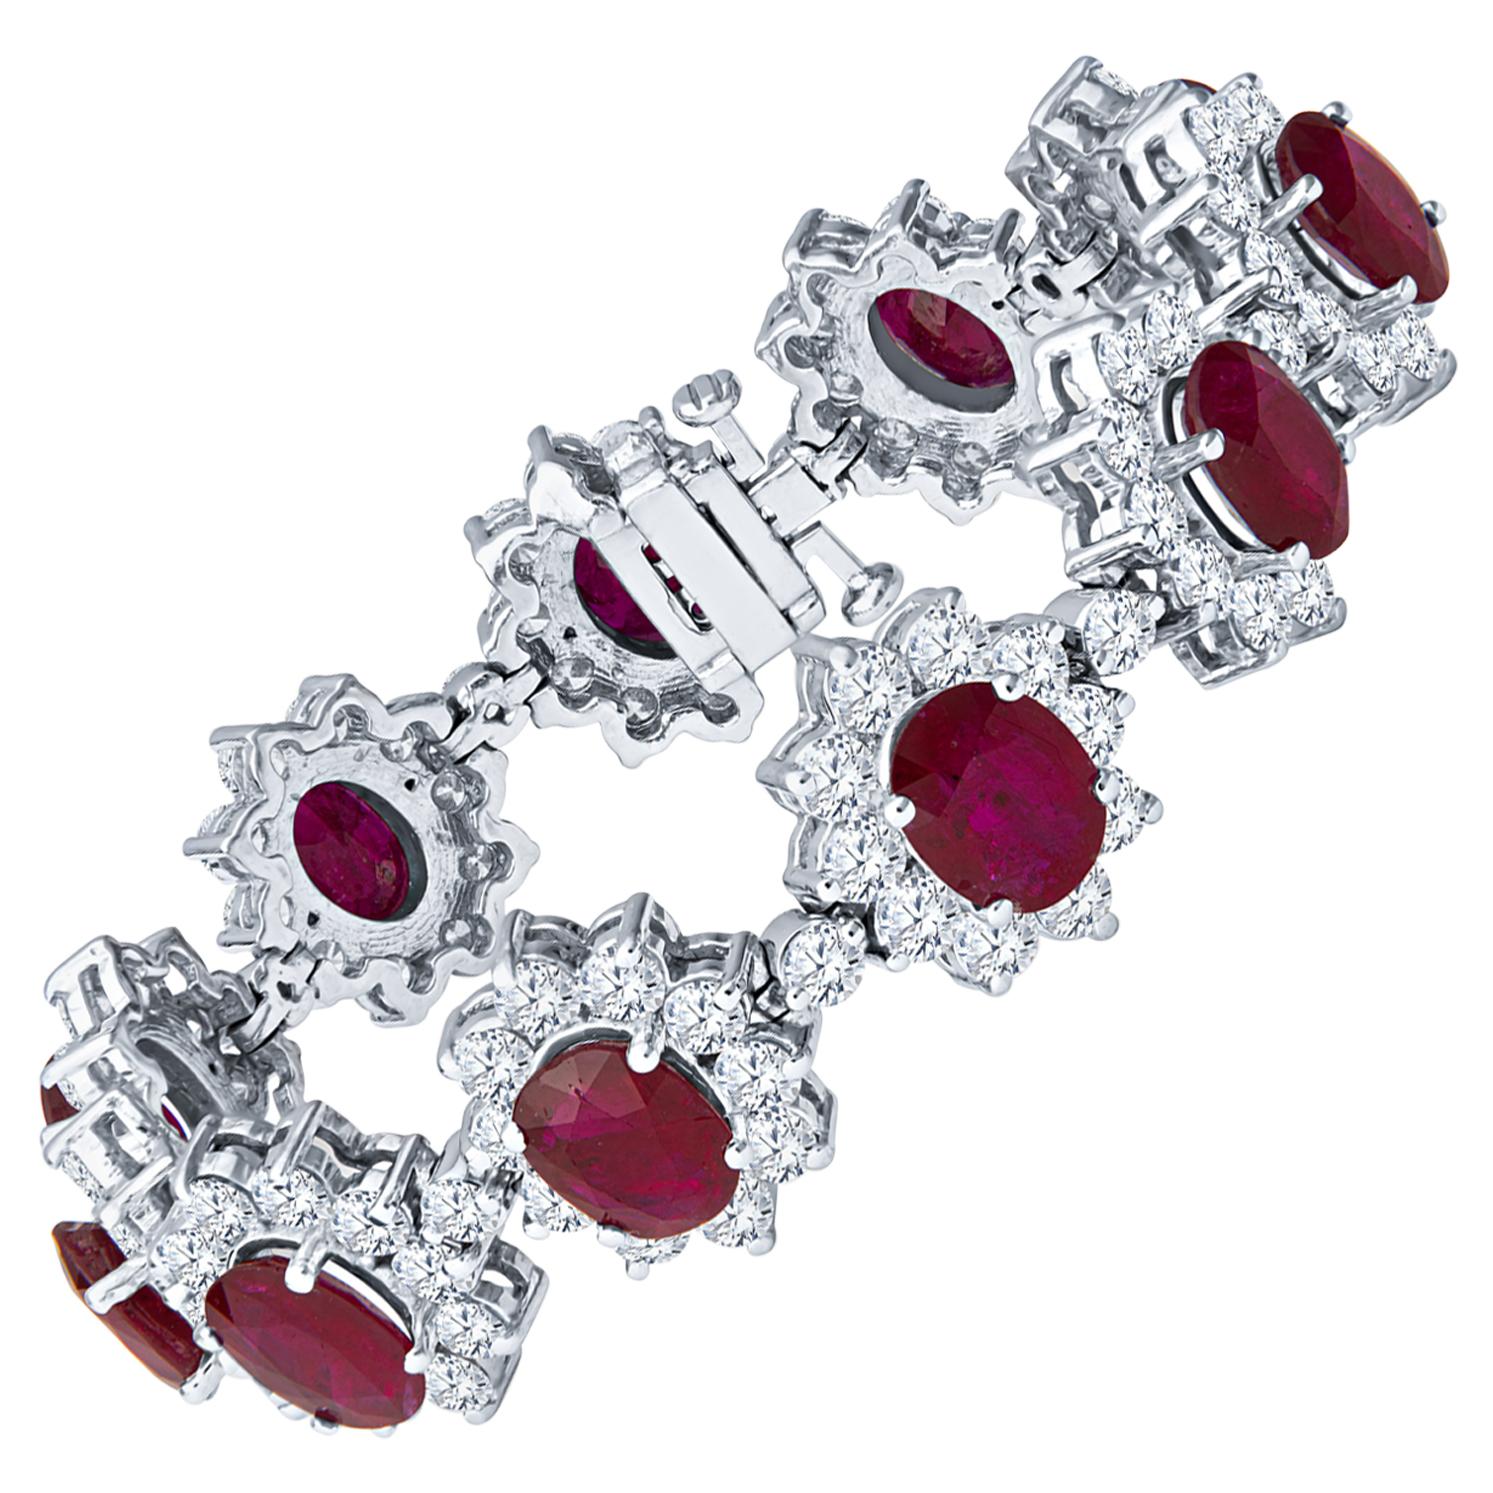 23.45 Carat Oval Ruby and 14.40ct Round Diamond Floral 18k White Gold Bracelet